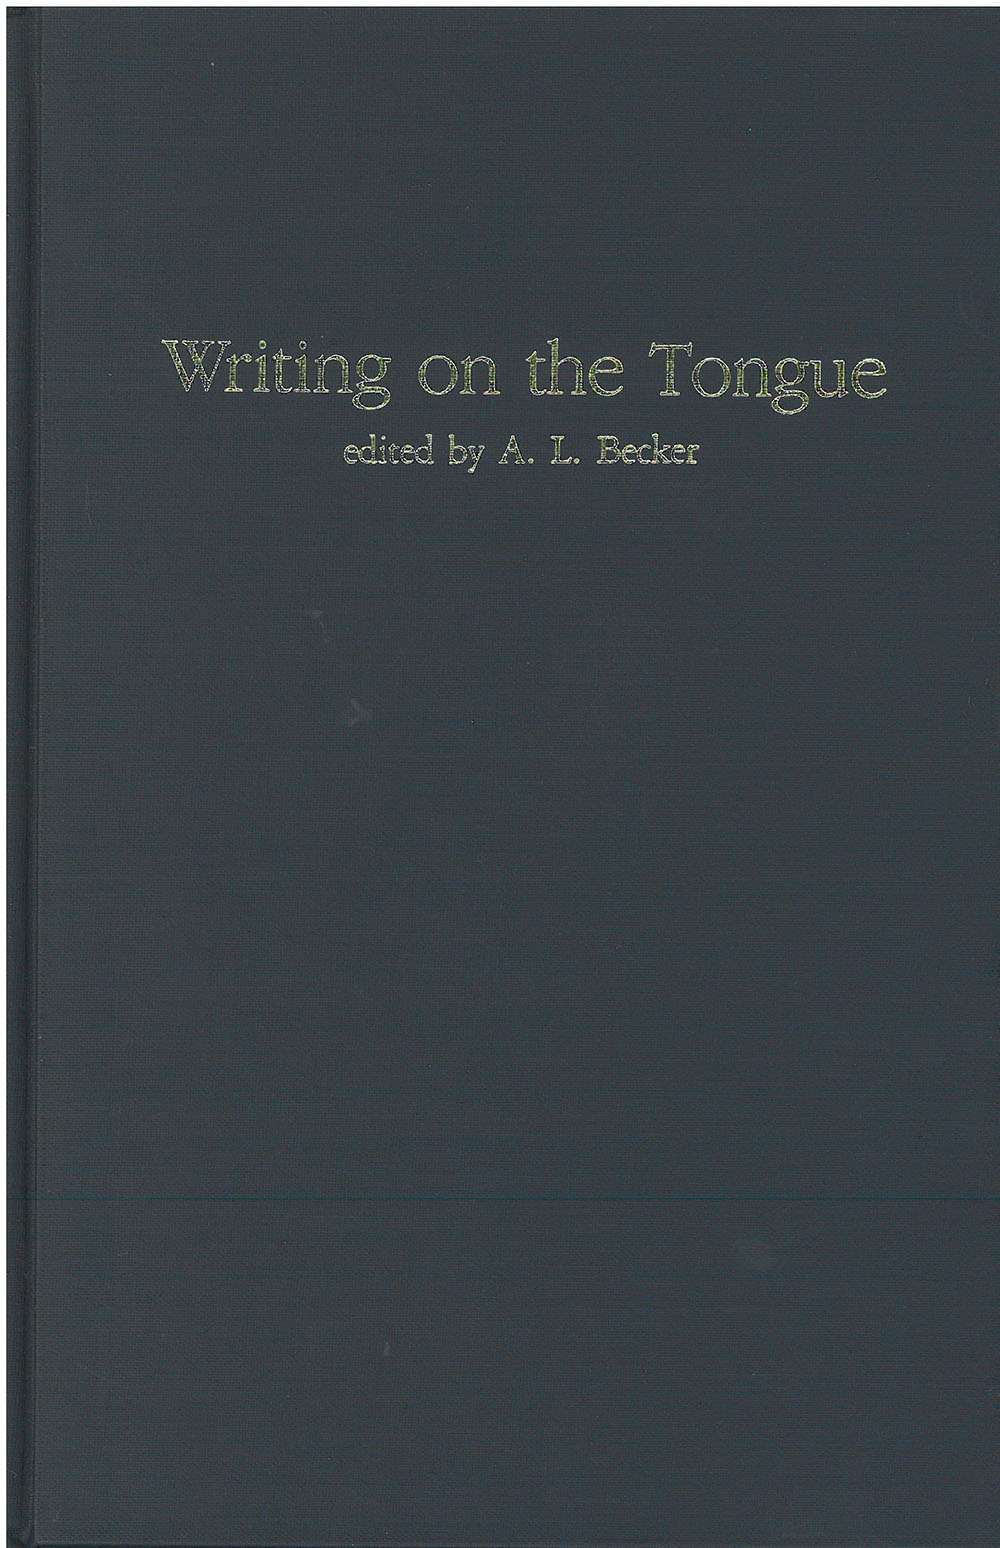 Writing on the Tongue